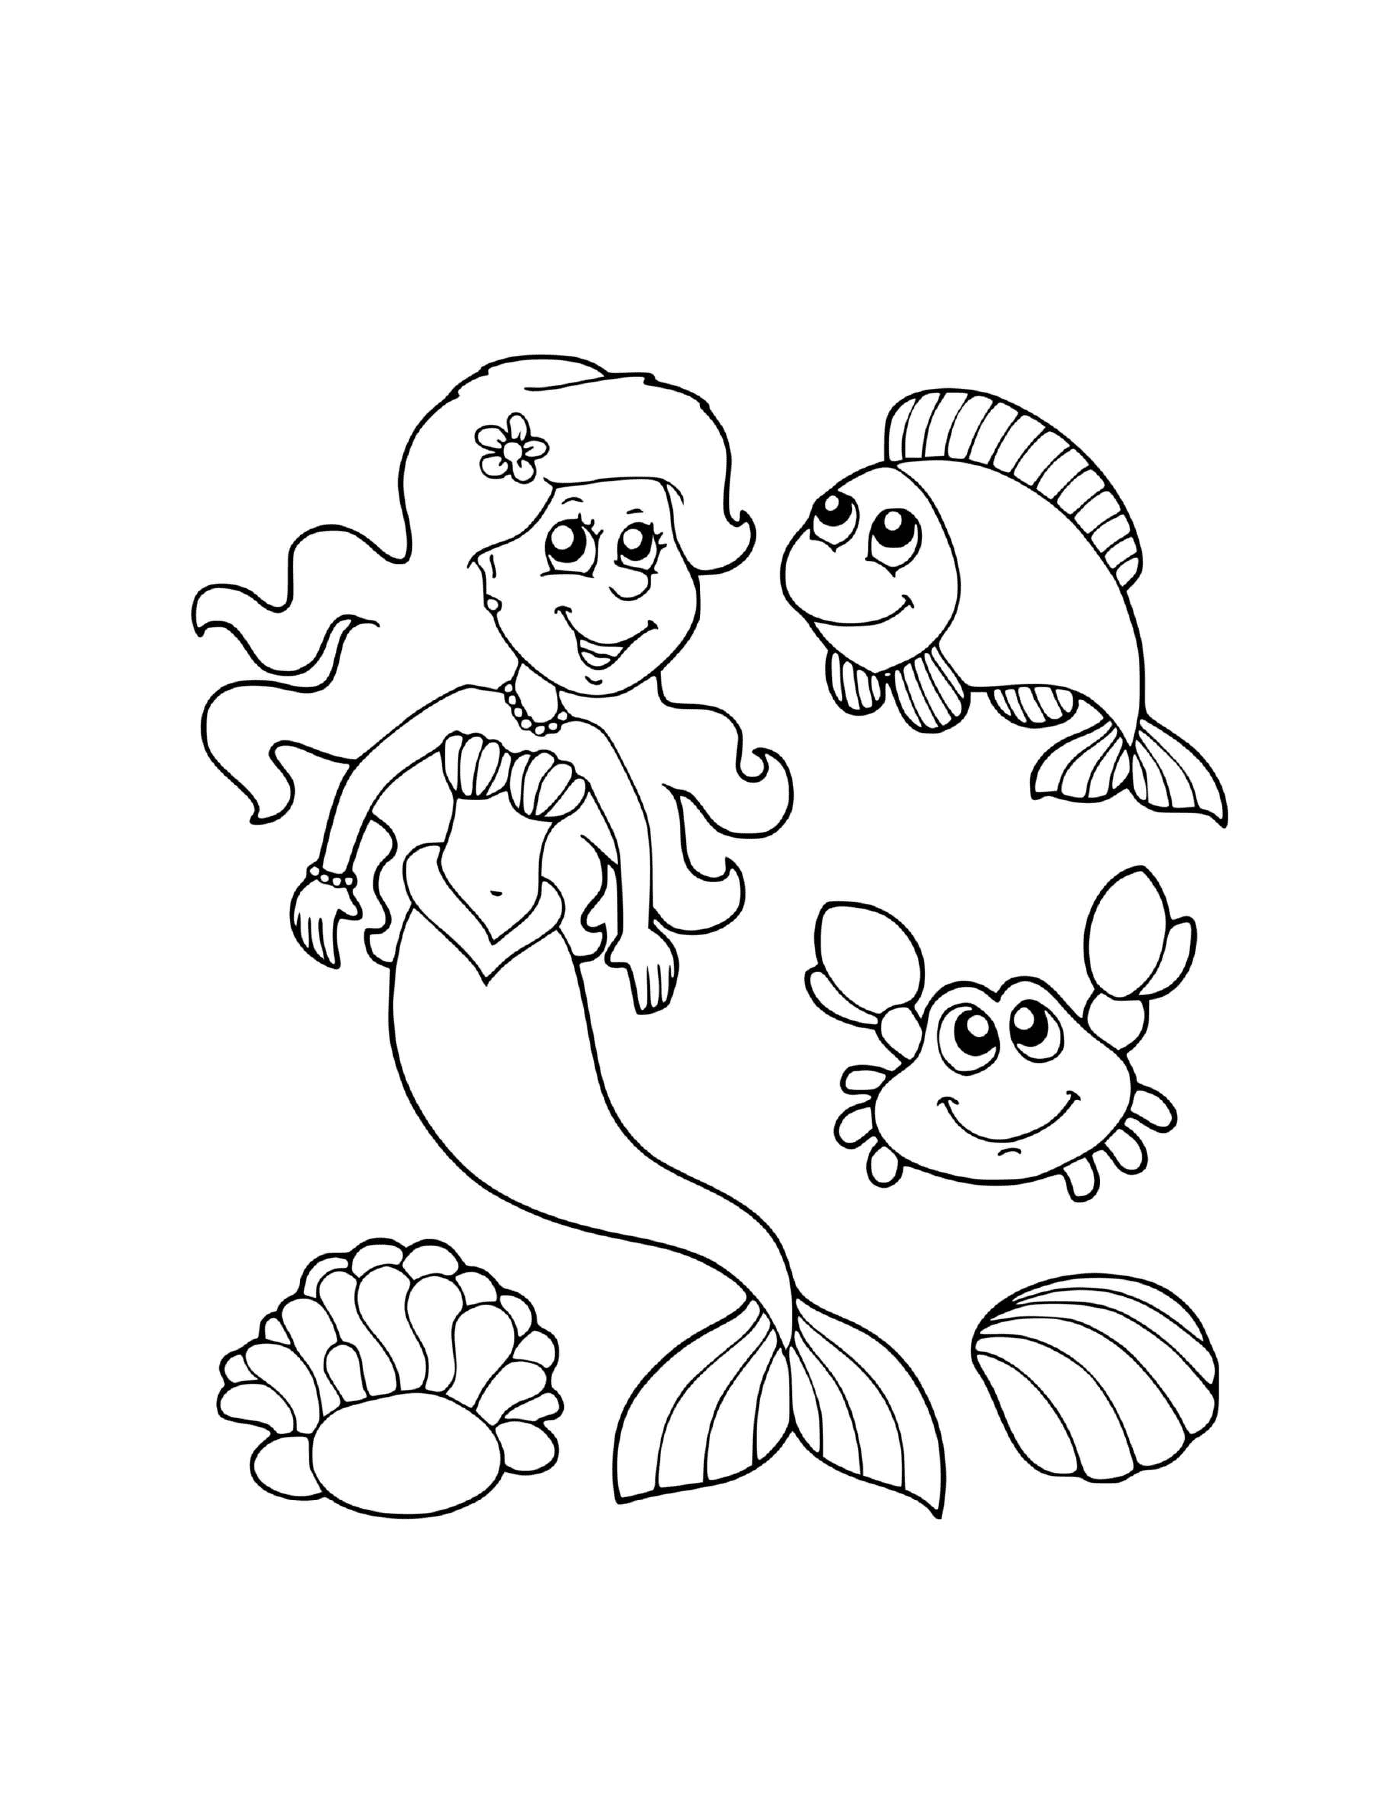  Sirene with marine friends: fish and crab 